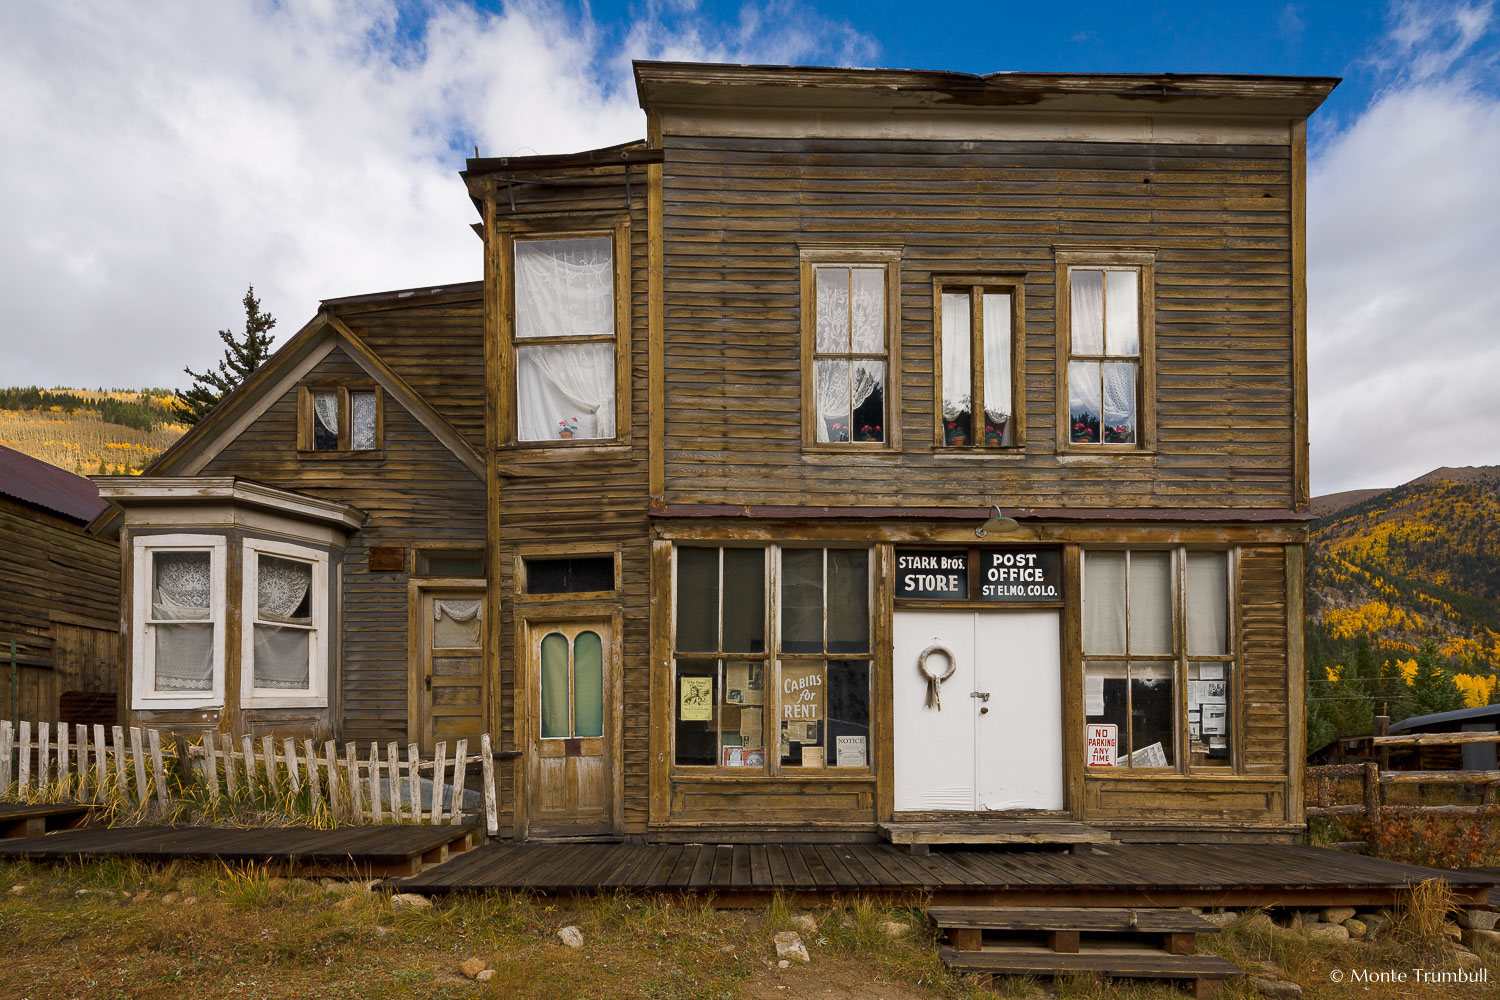 MT-20111004-092216-0037-Colorado-St-Elmo-ghost-town-old-building-fall.jpg